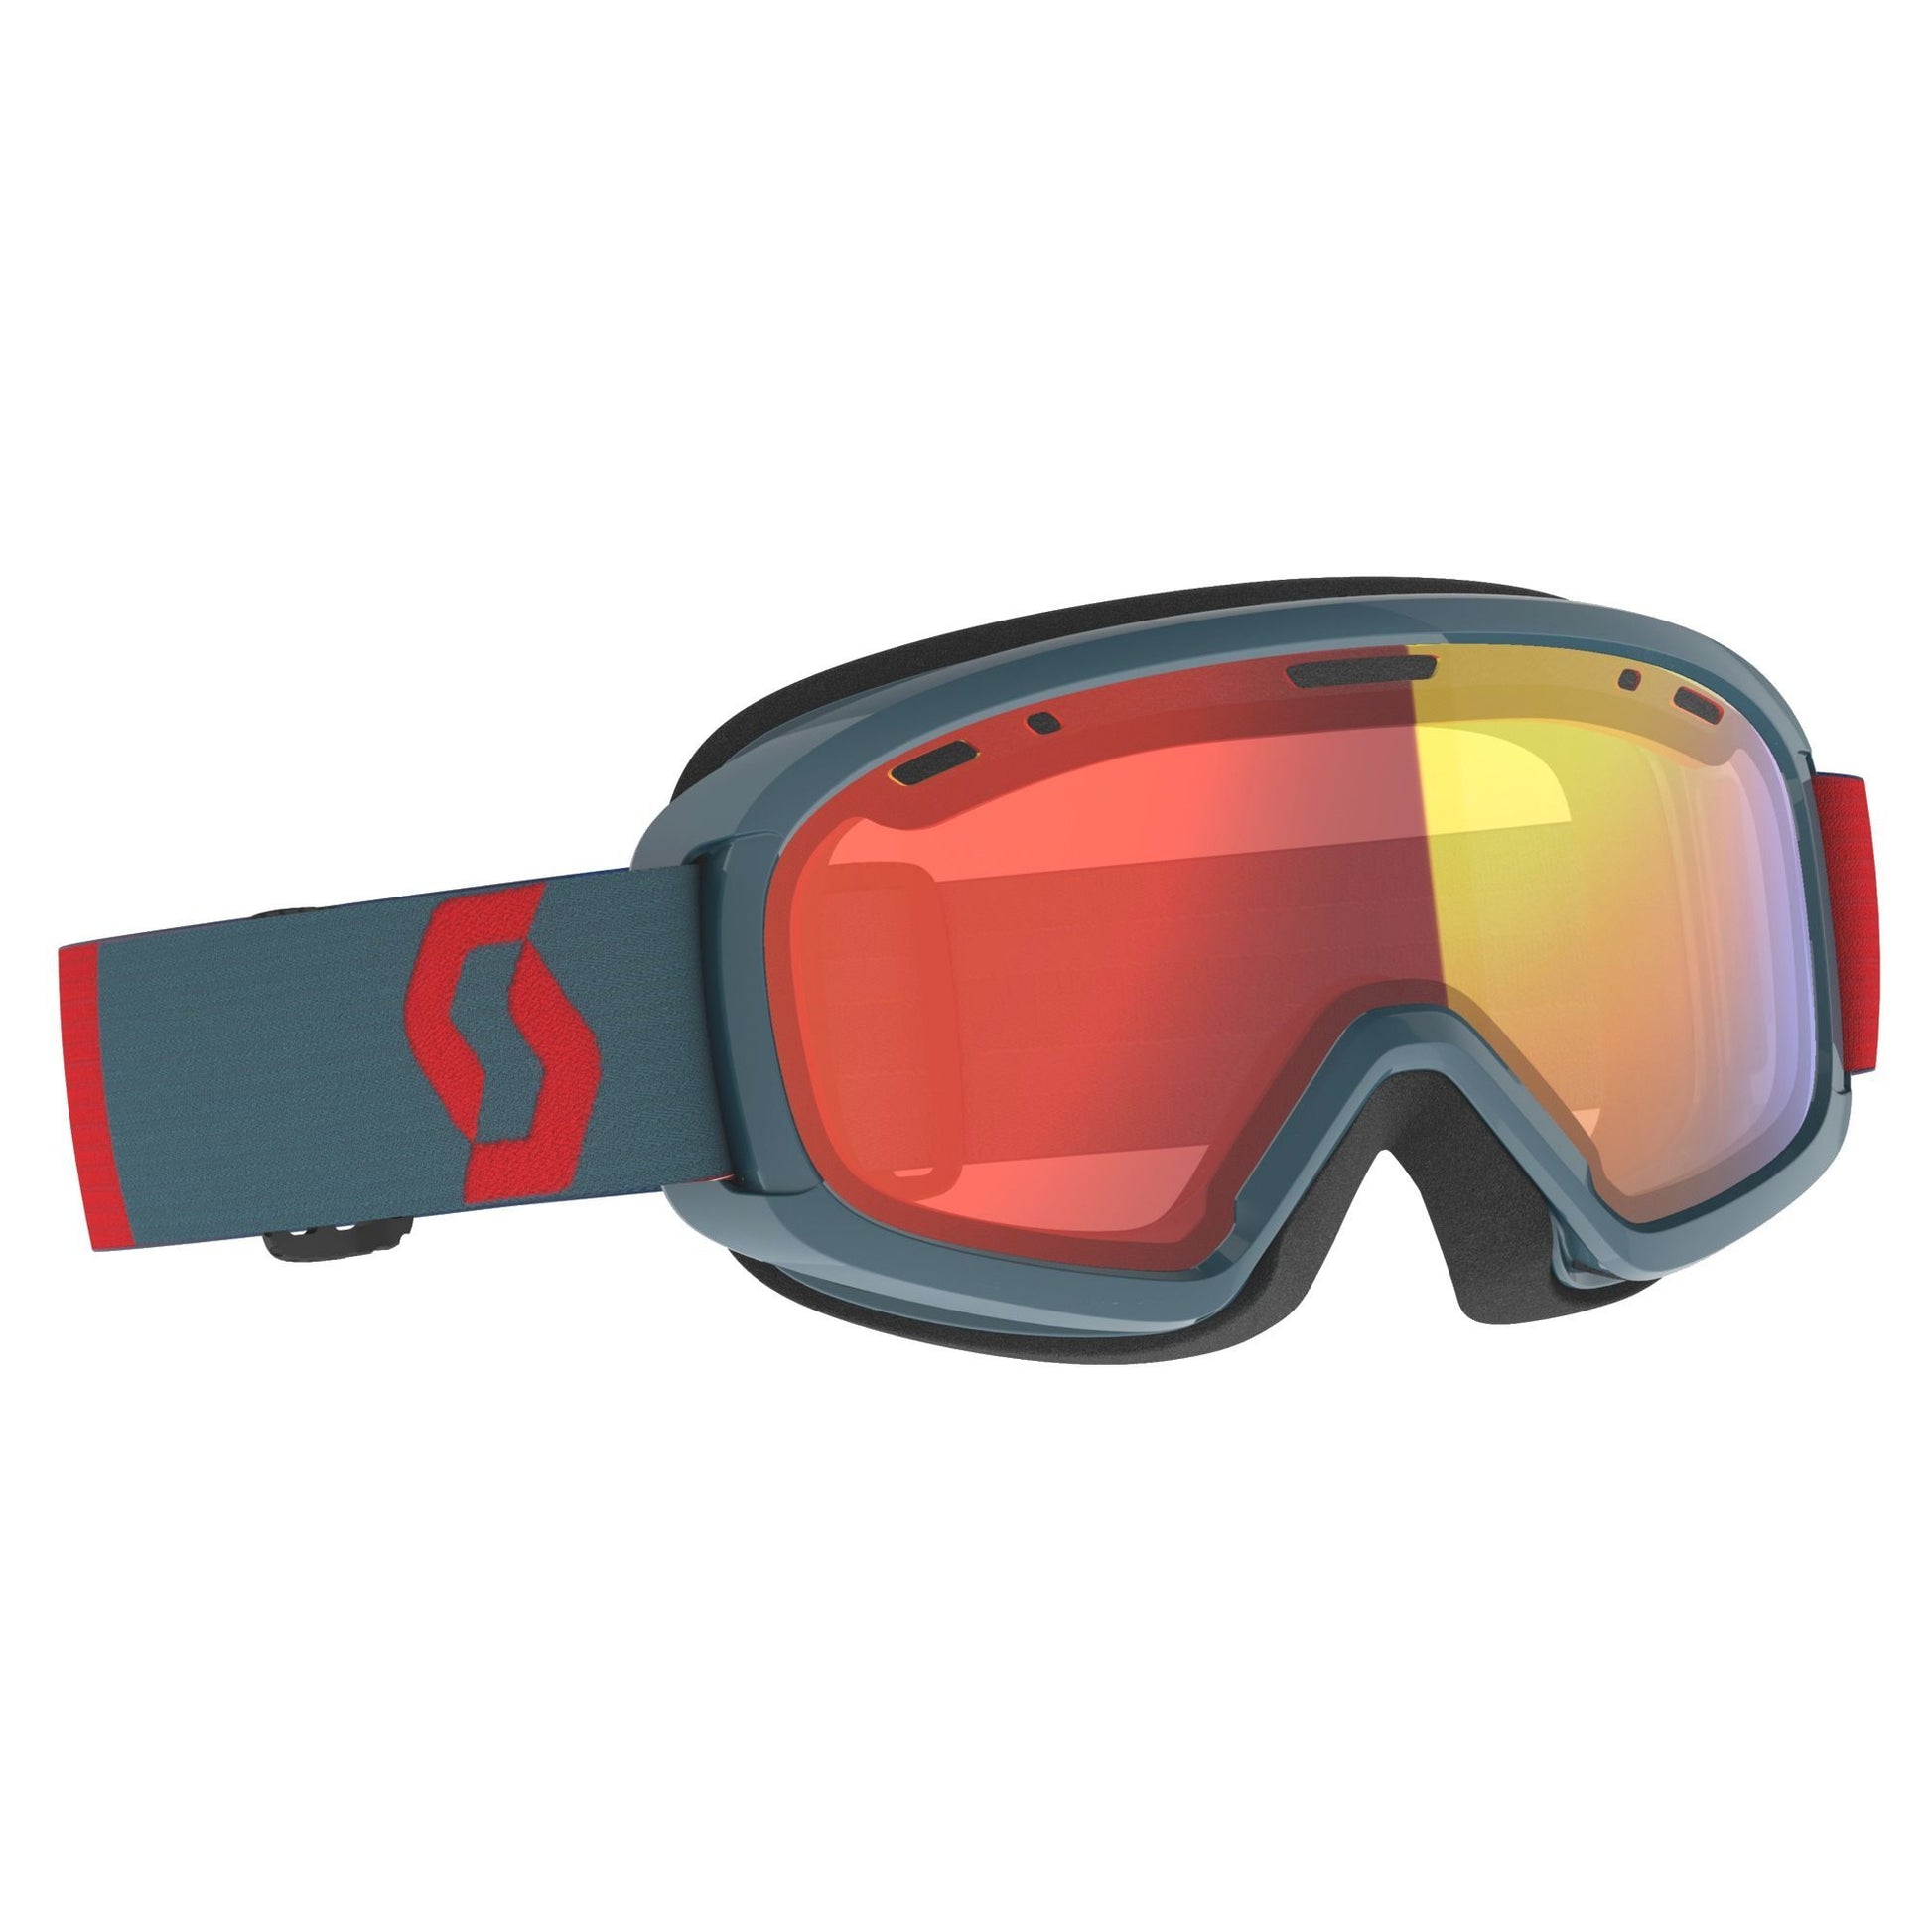 Scott Youth Jr Witty Chrome Snow Goggle Neon Red/Aruba Green / Enhancer Red Chrome Snow Goggles